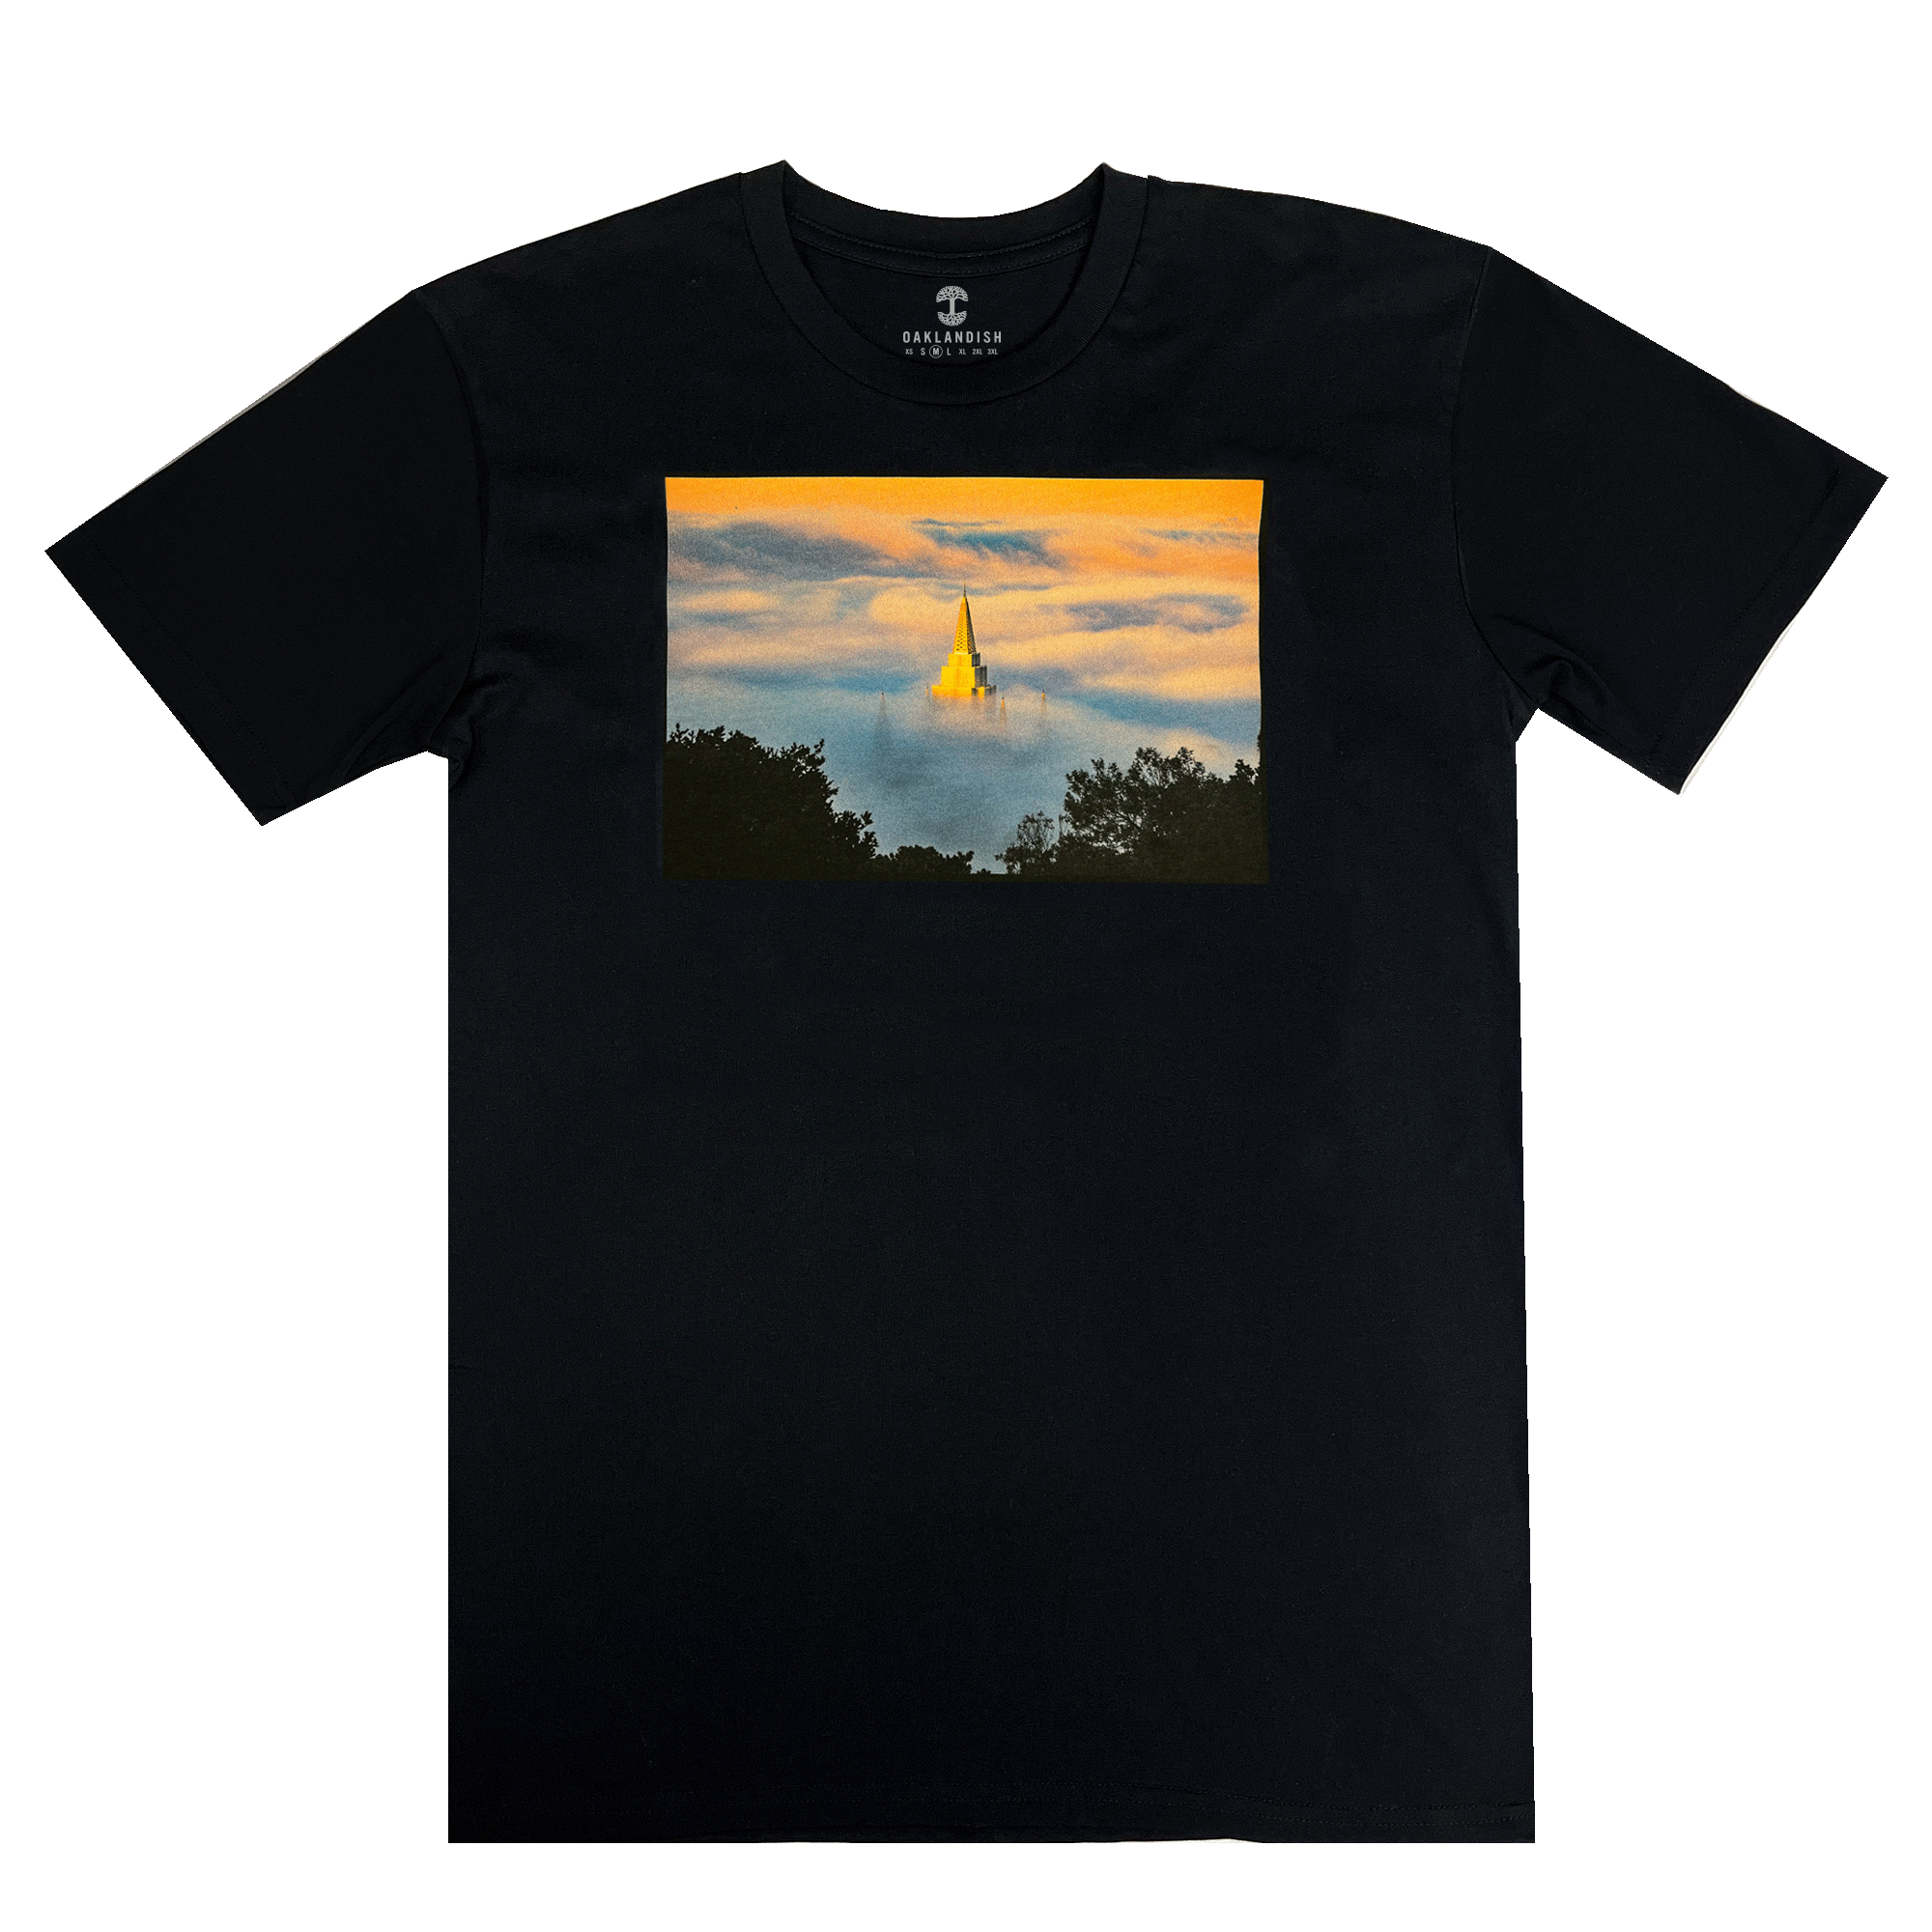 Black t-shirt with an image of an Oakland Temple surrounded by fog by landscape photographer Vincent James.